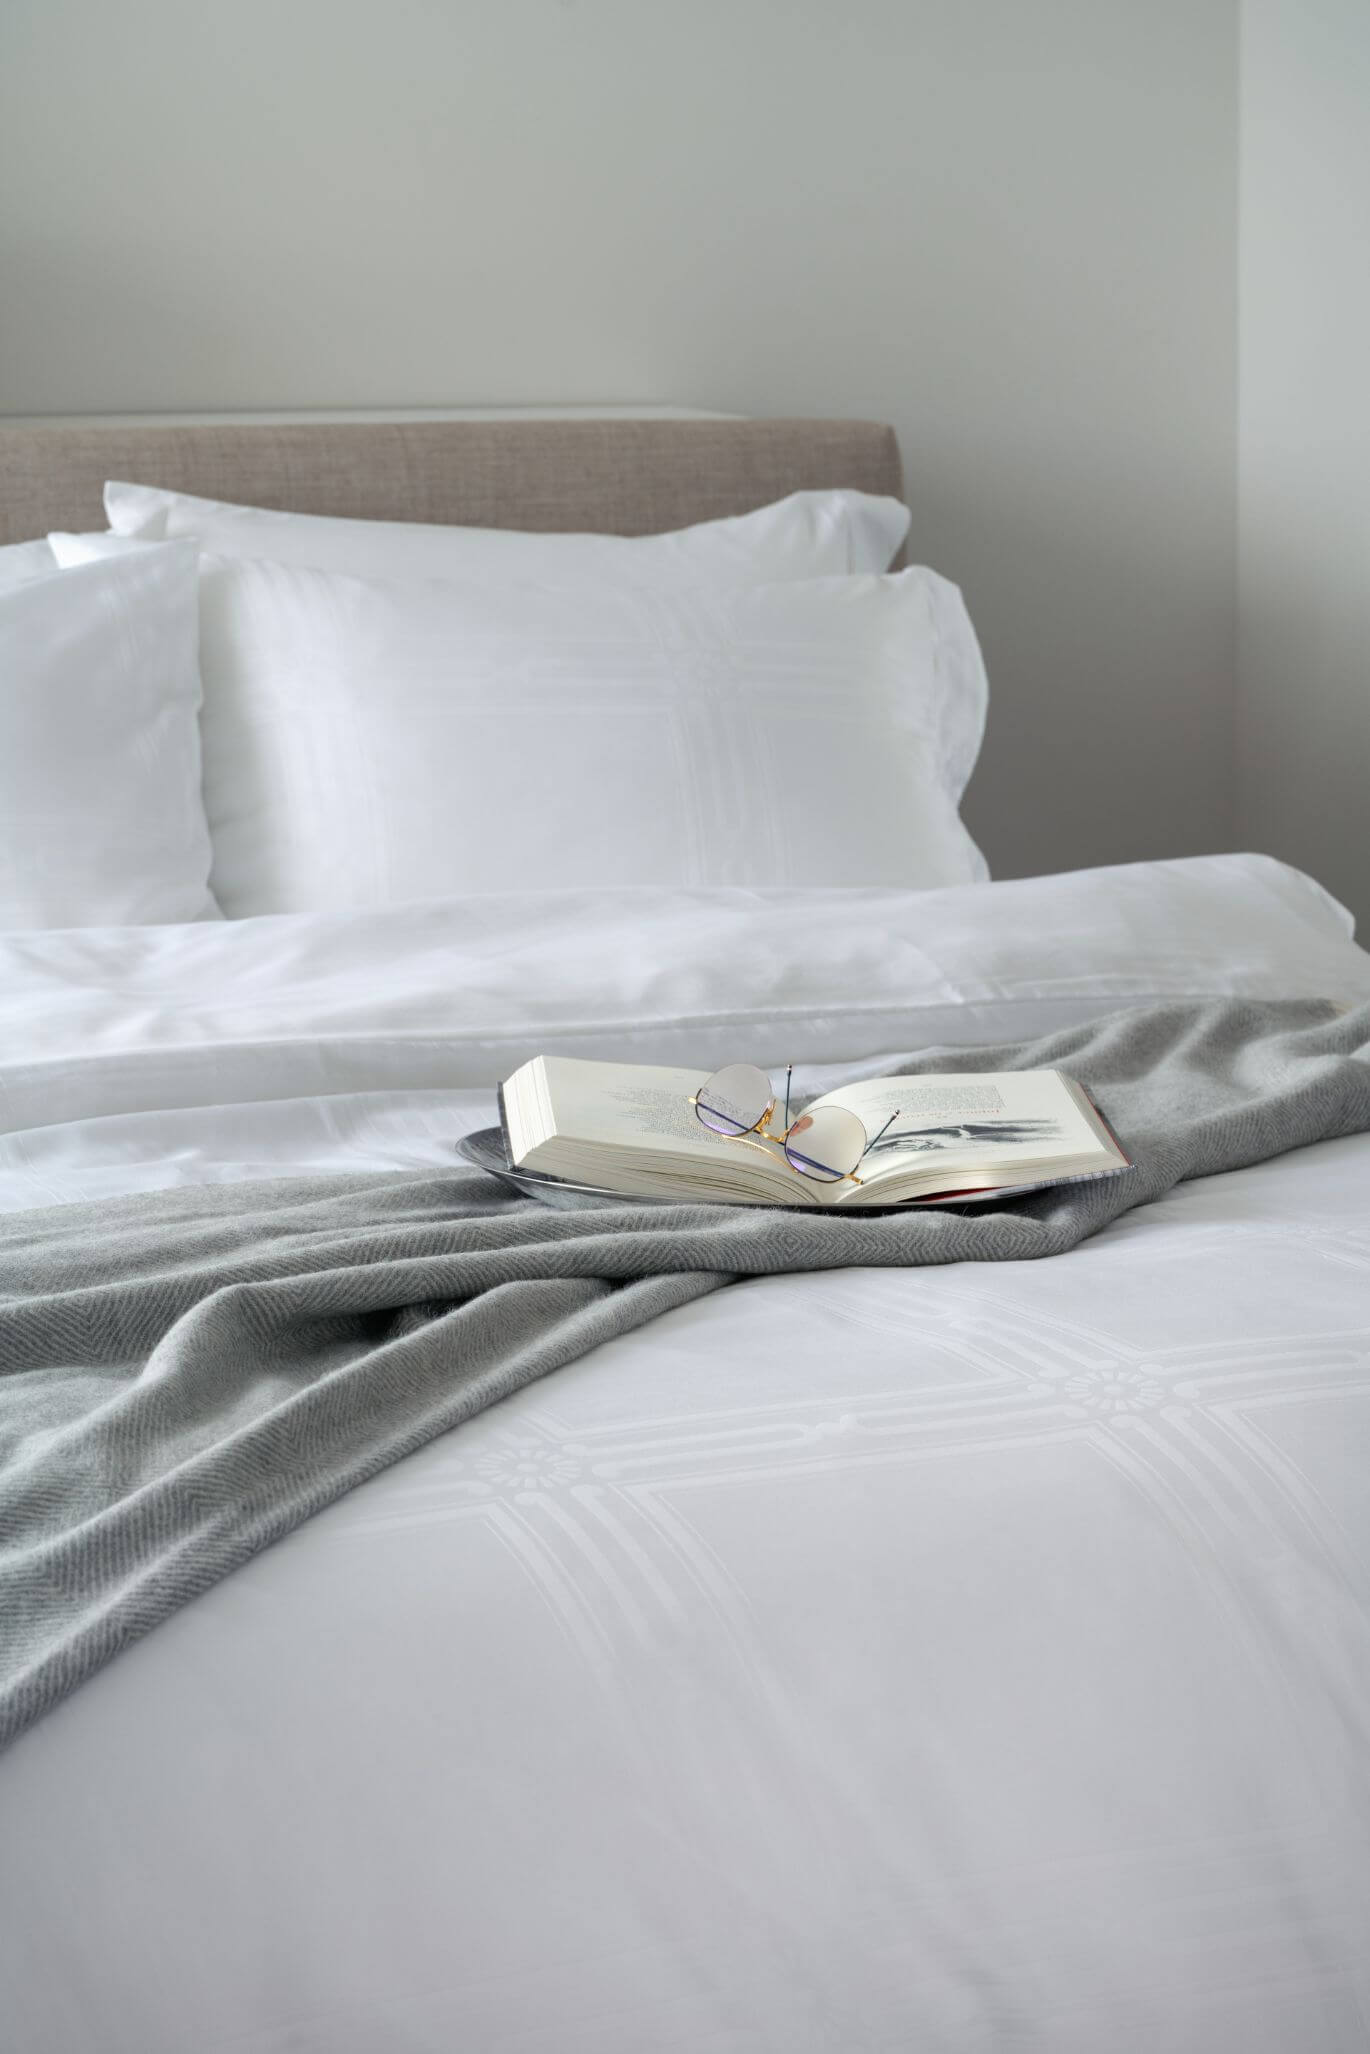 Marialma's bed sheets in Pantone Brilliant White